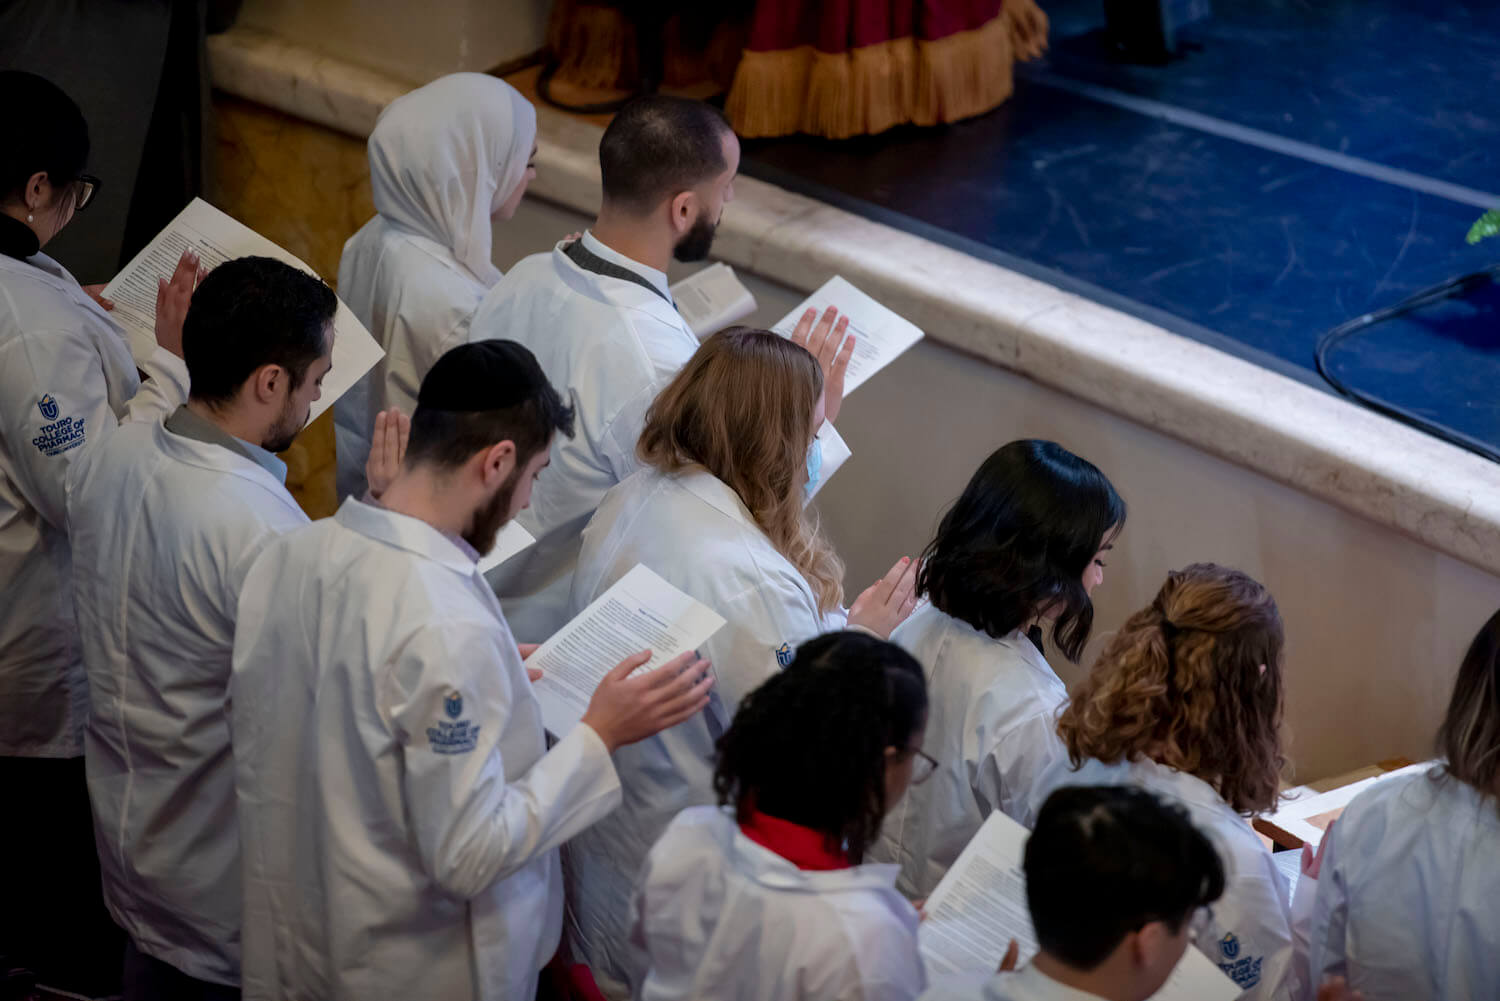 Pharmacy students in white coats reciting the Pharmacist Oath.